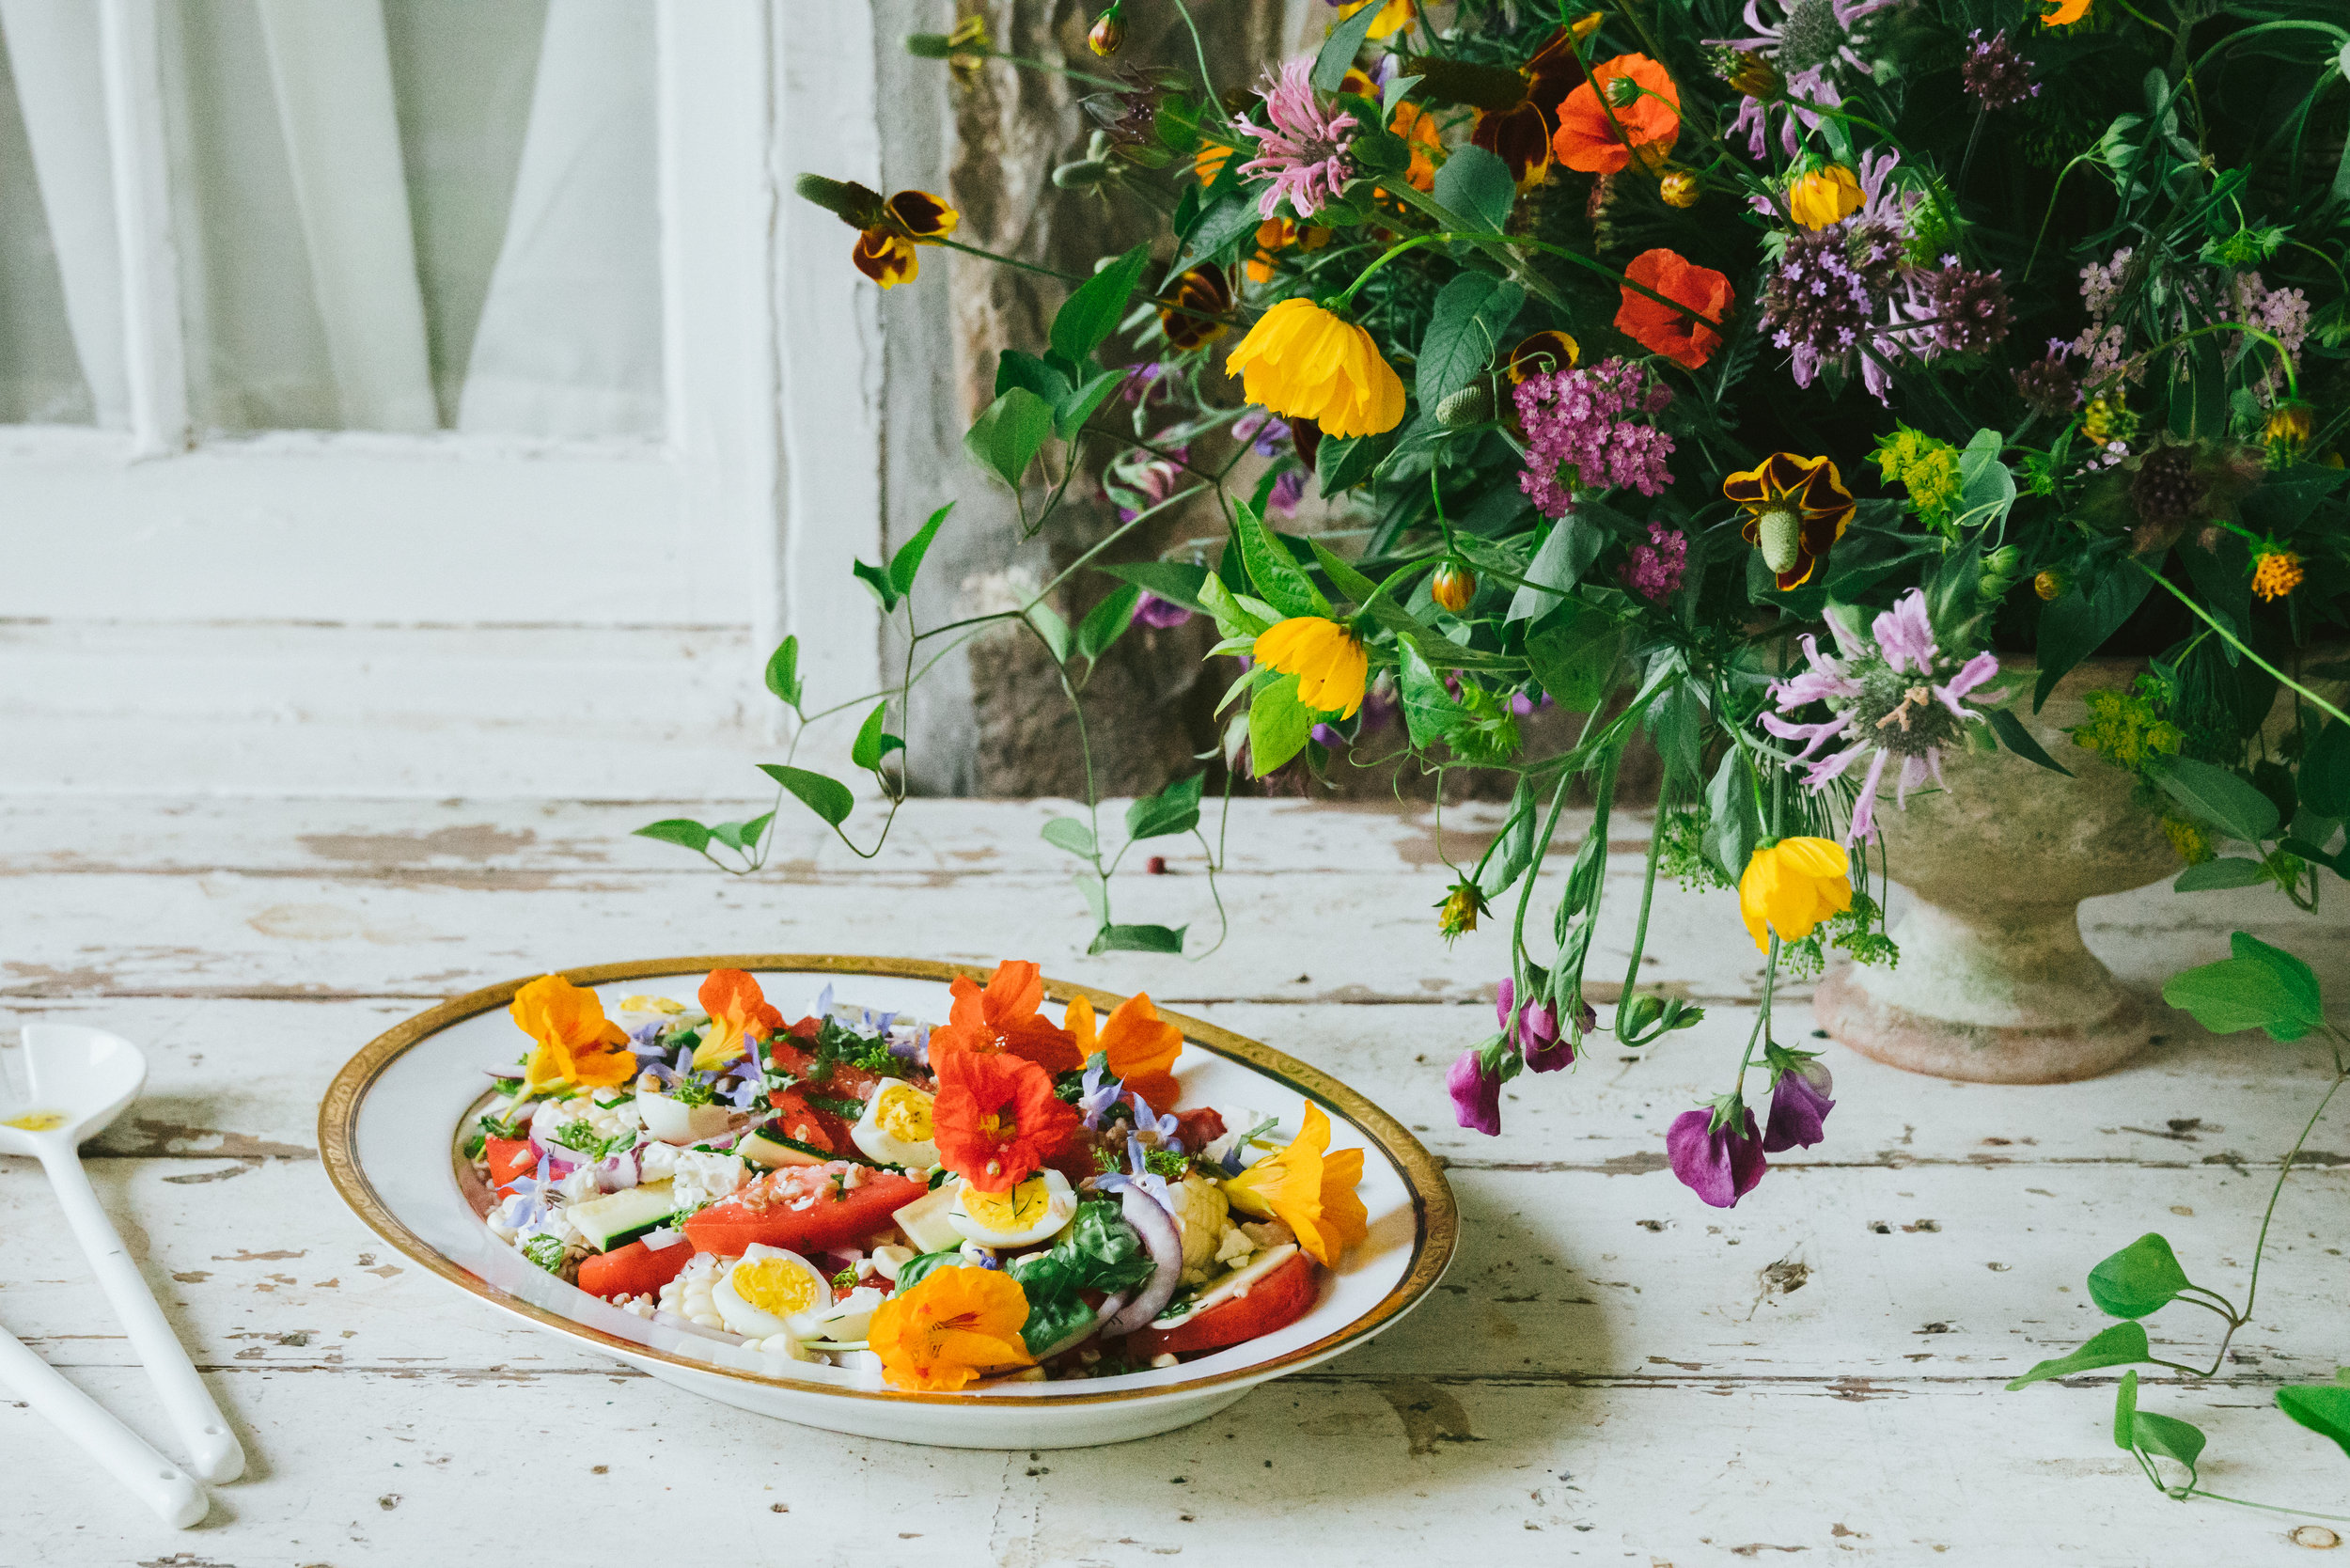 Food and Flowers: June Tomato Salad, Herbs and Country Flowers